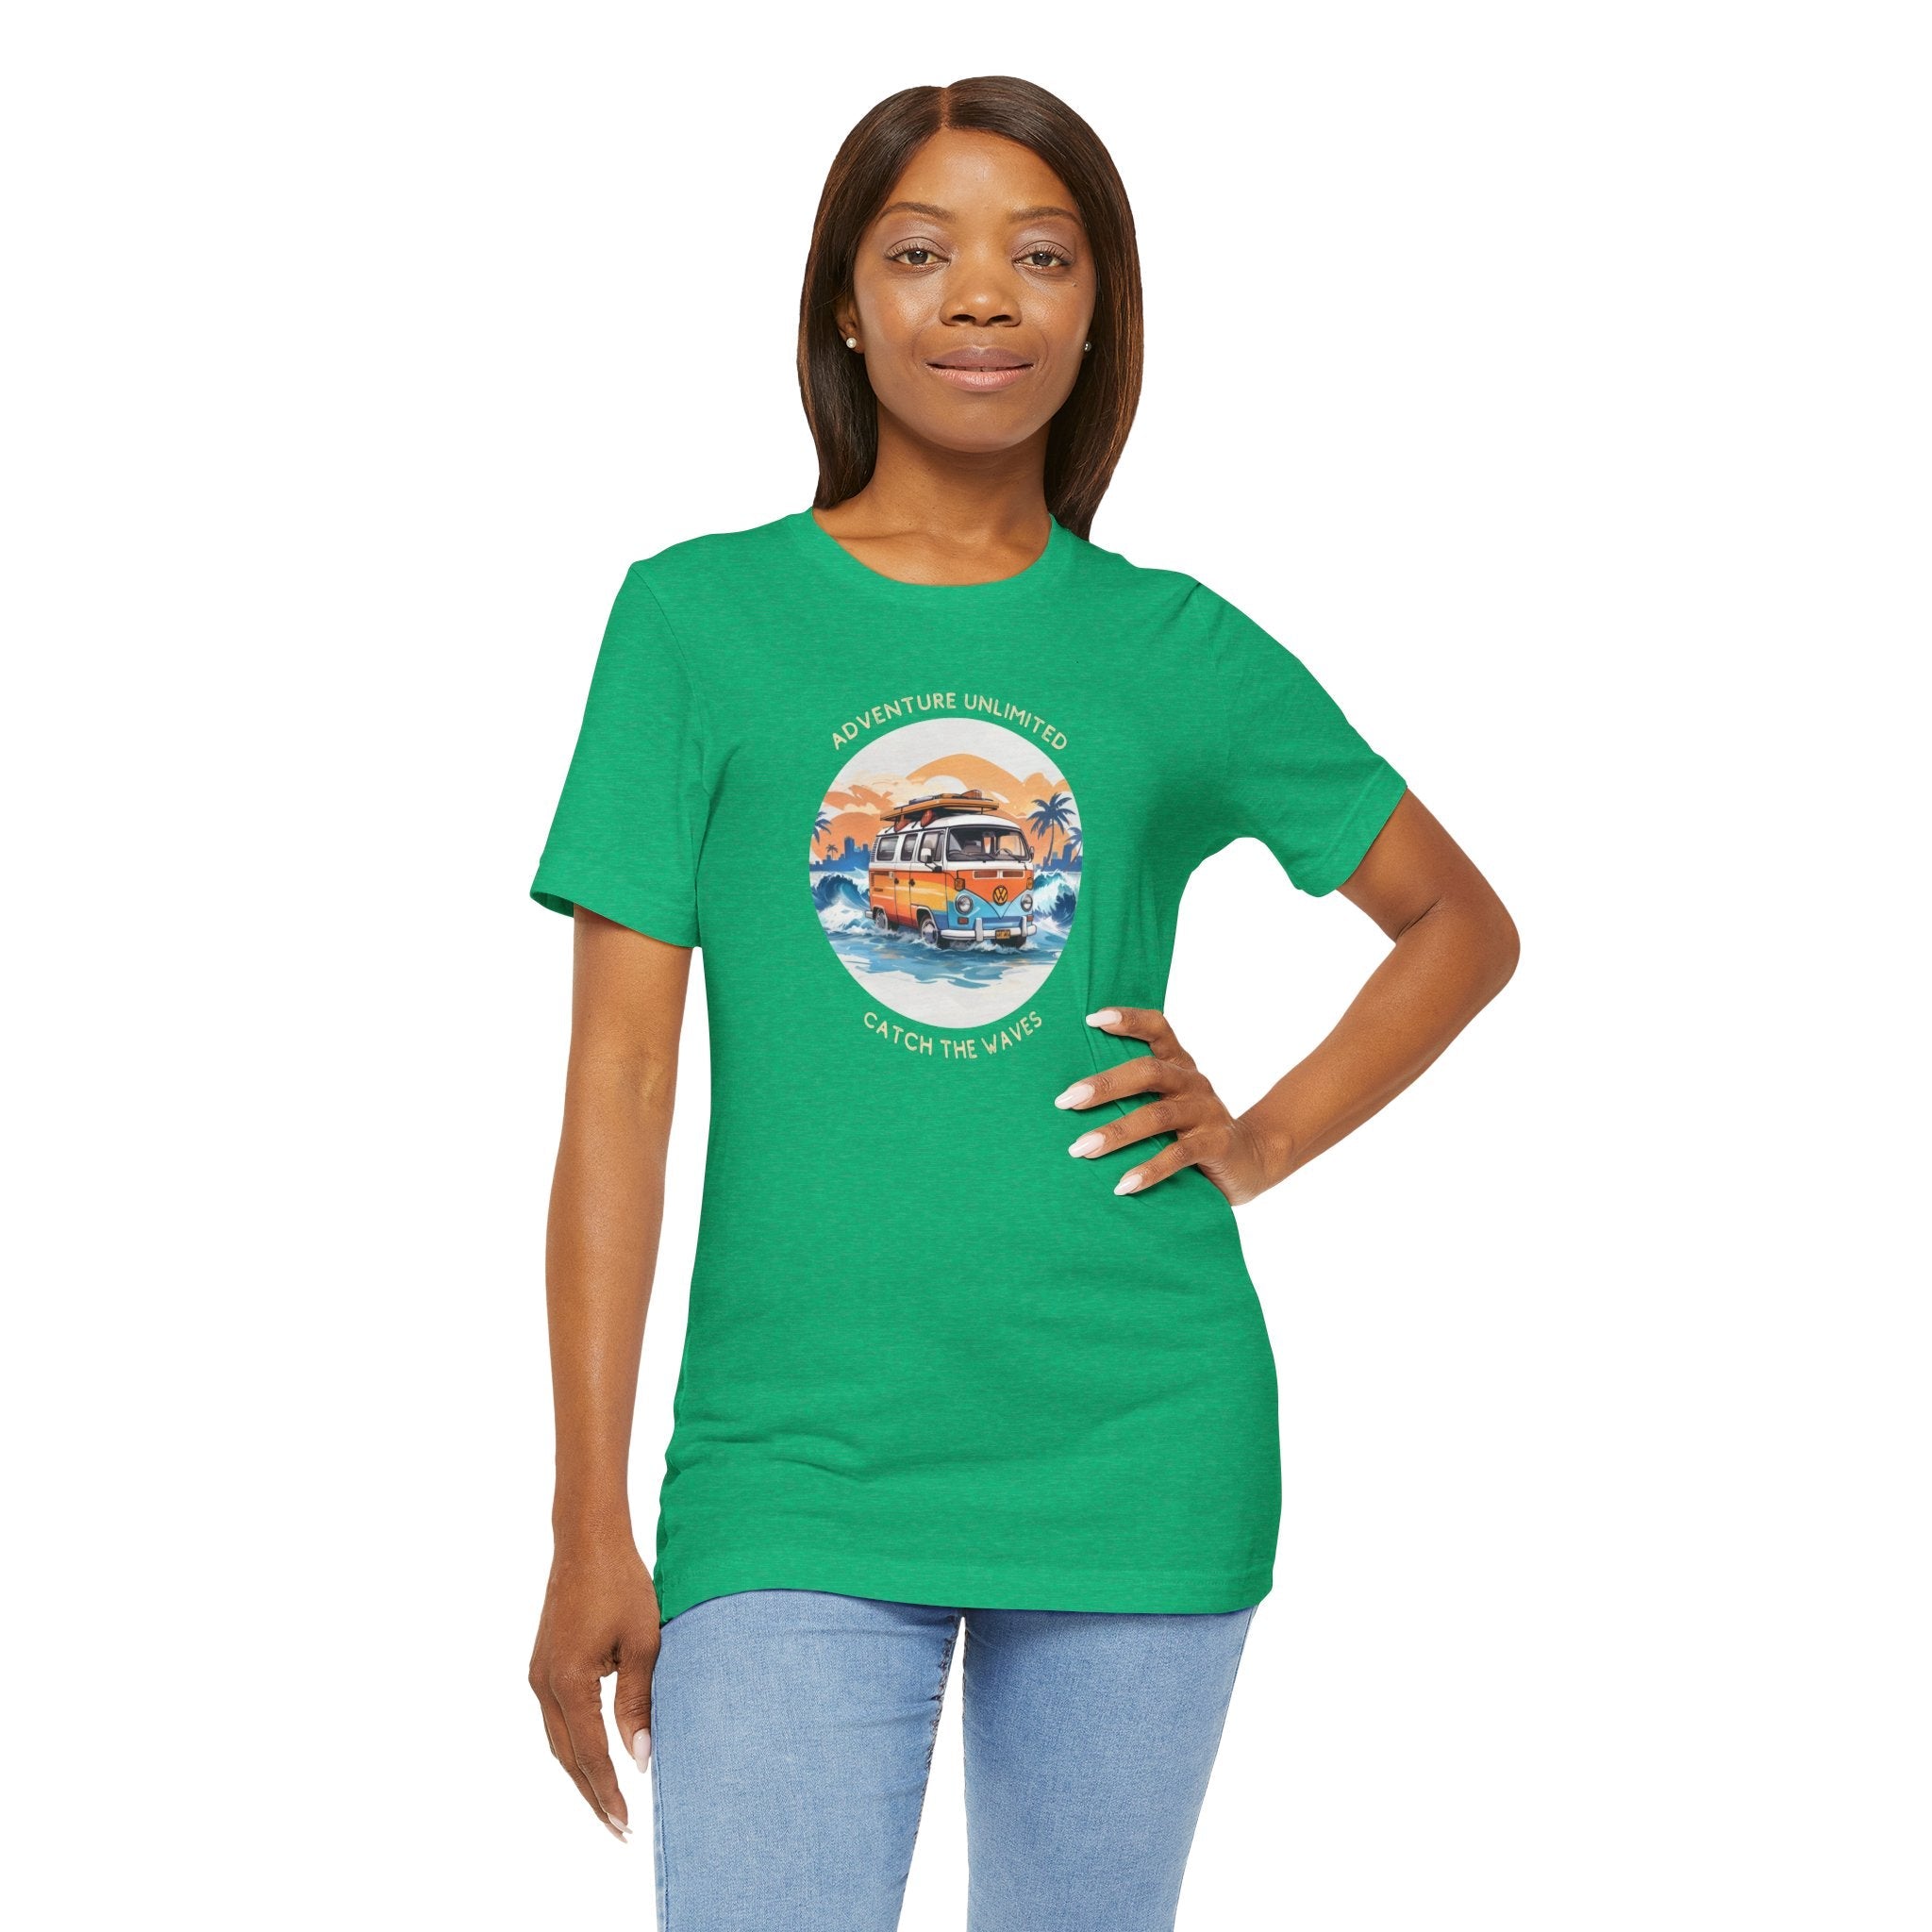 Green ’I’m T-Shirt’ on Adventure Unlimited Unisex Jersey - Direct-to-Garment Printed Item